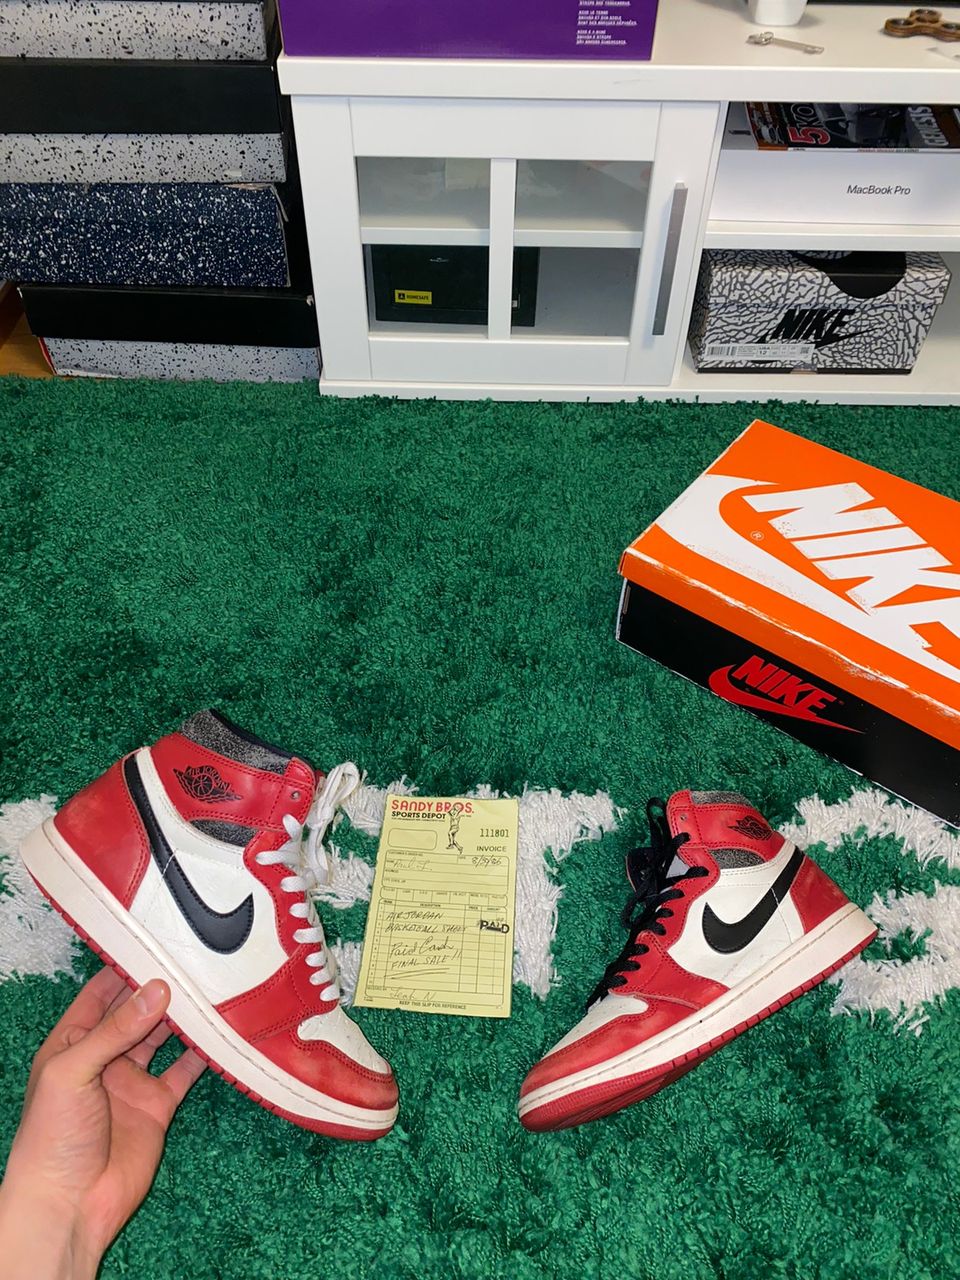 Air Jordan 1 Chicago Lost and Found